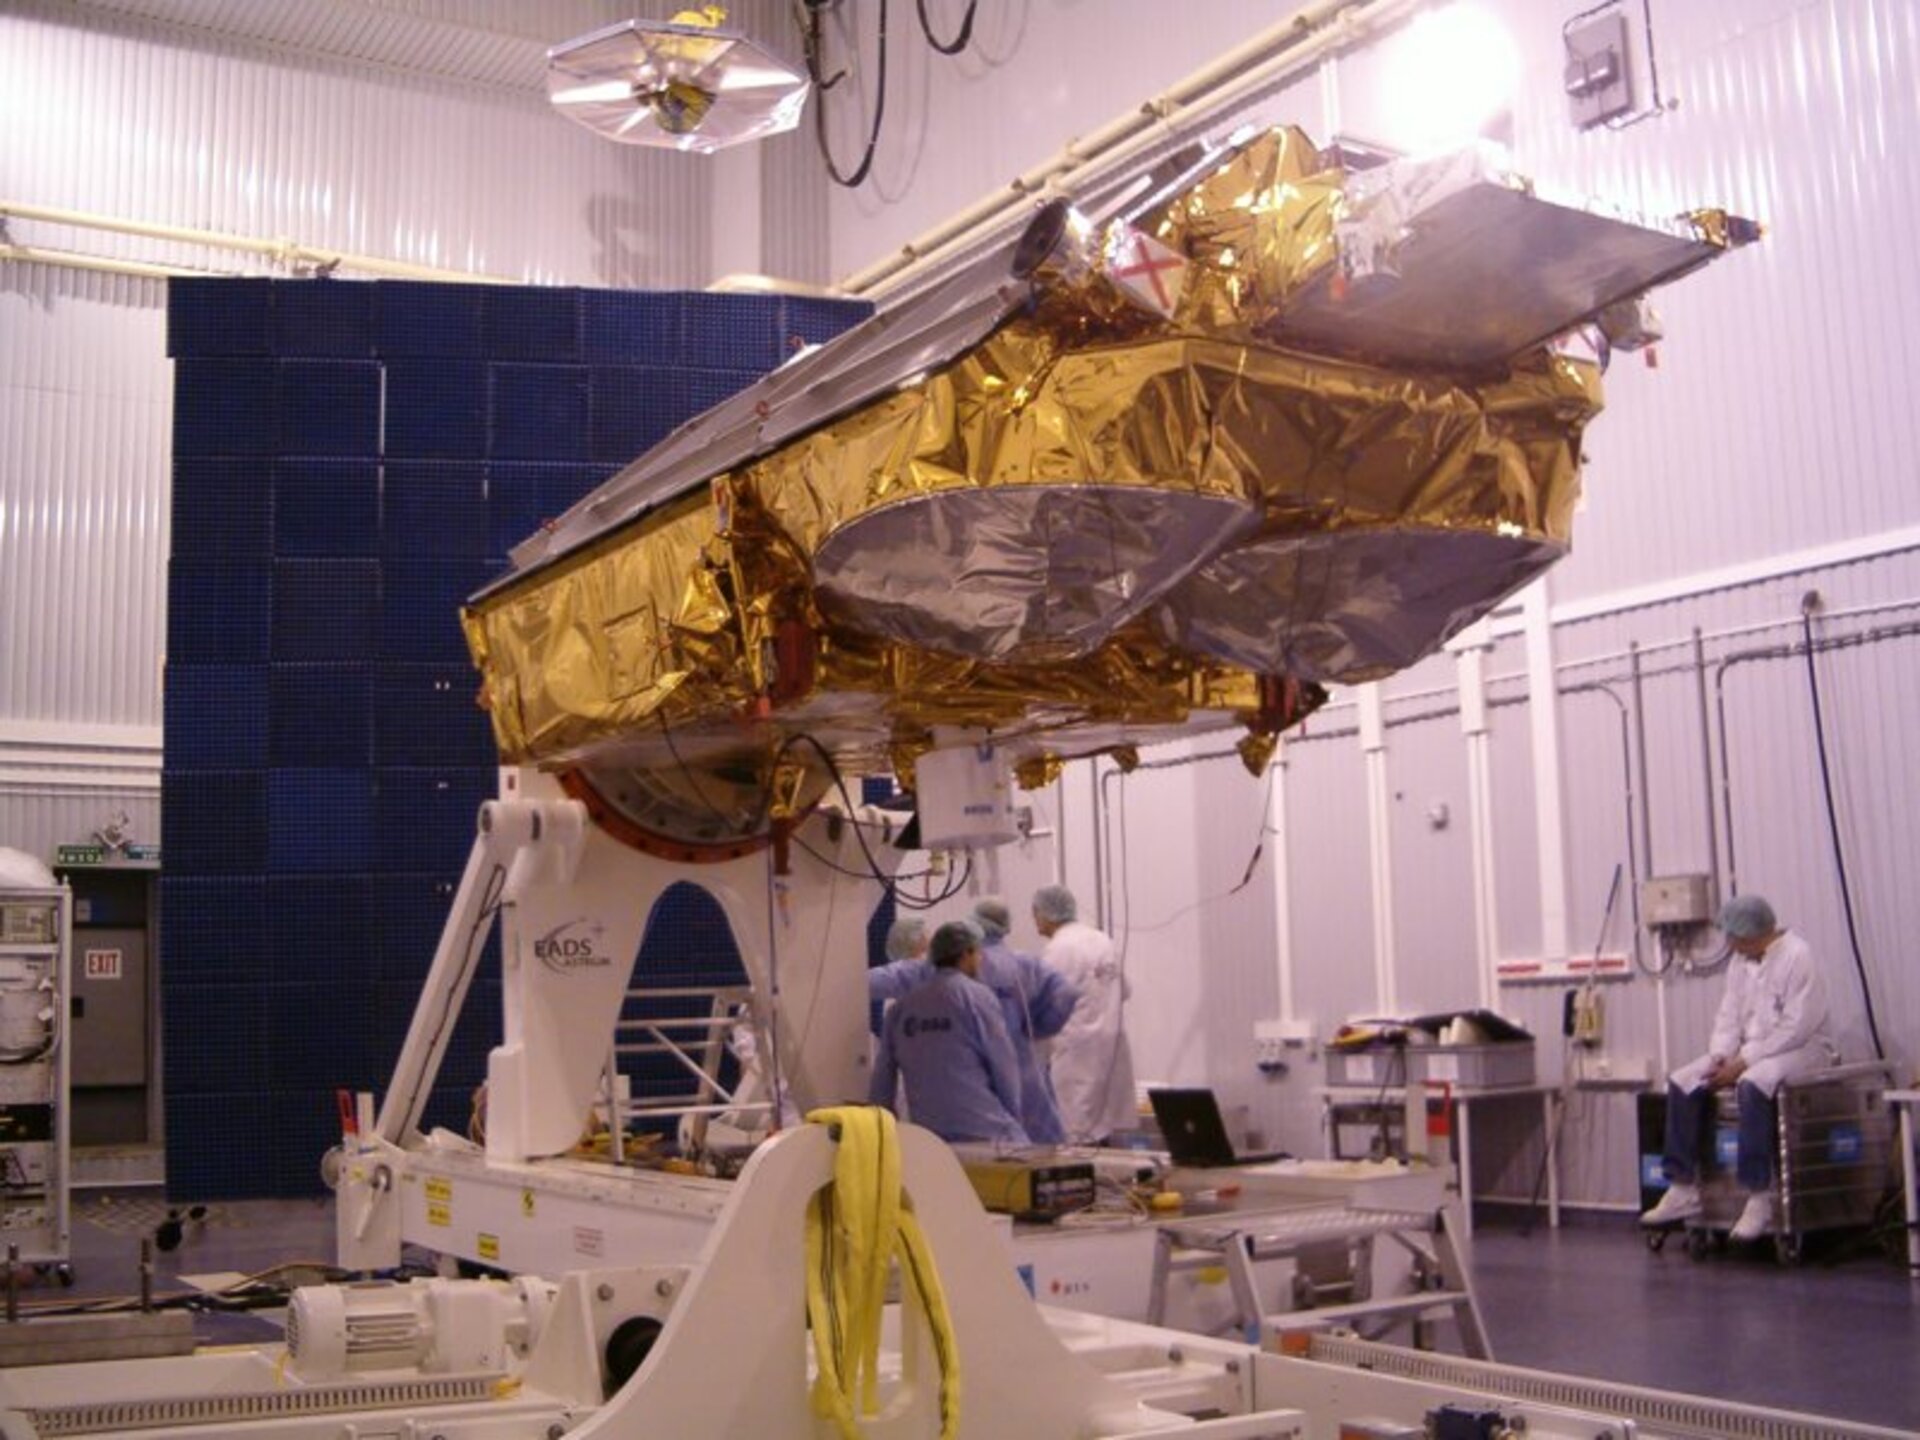 CryoSat in the clean room: the absorbing wall